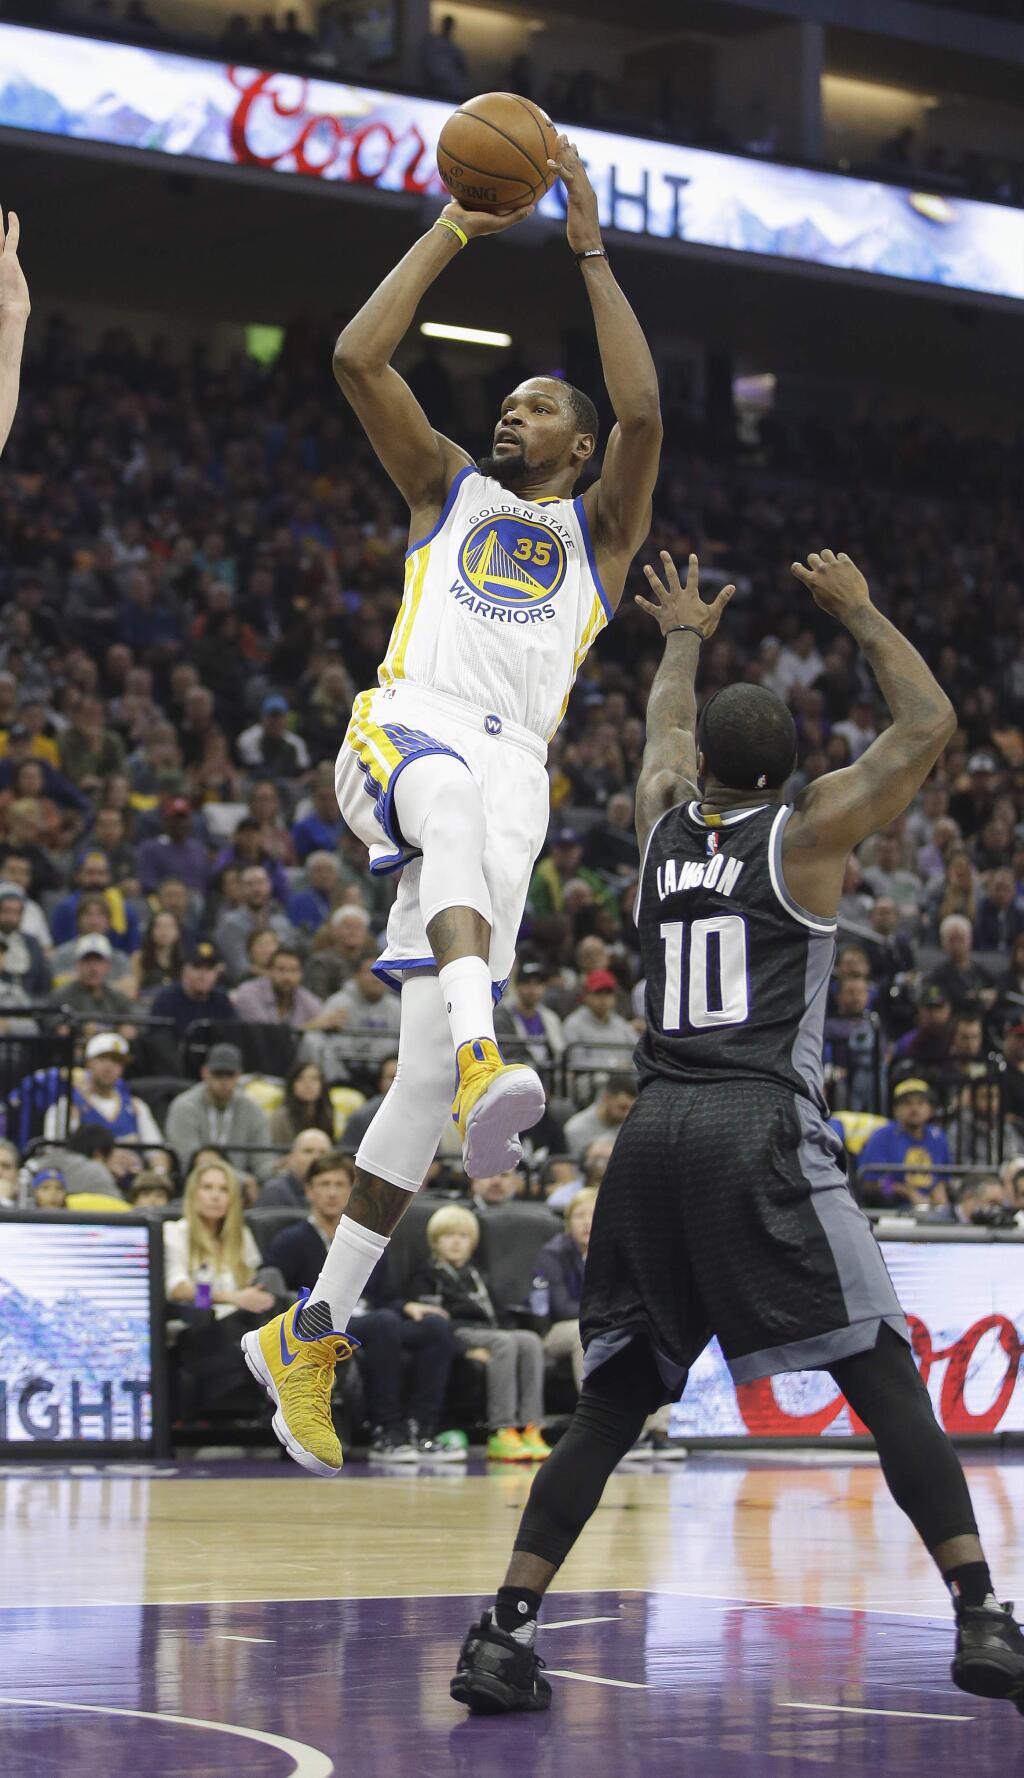 Golden State Warriors forward Kevin Durant, left, shoots over Sacramento Kings guard Ty Lawson during the first half of an NBA basketball game Sunday, Jan. 8, 2017, in Sacramento, Calif. (AP Photo/Rich Pedroncelli)